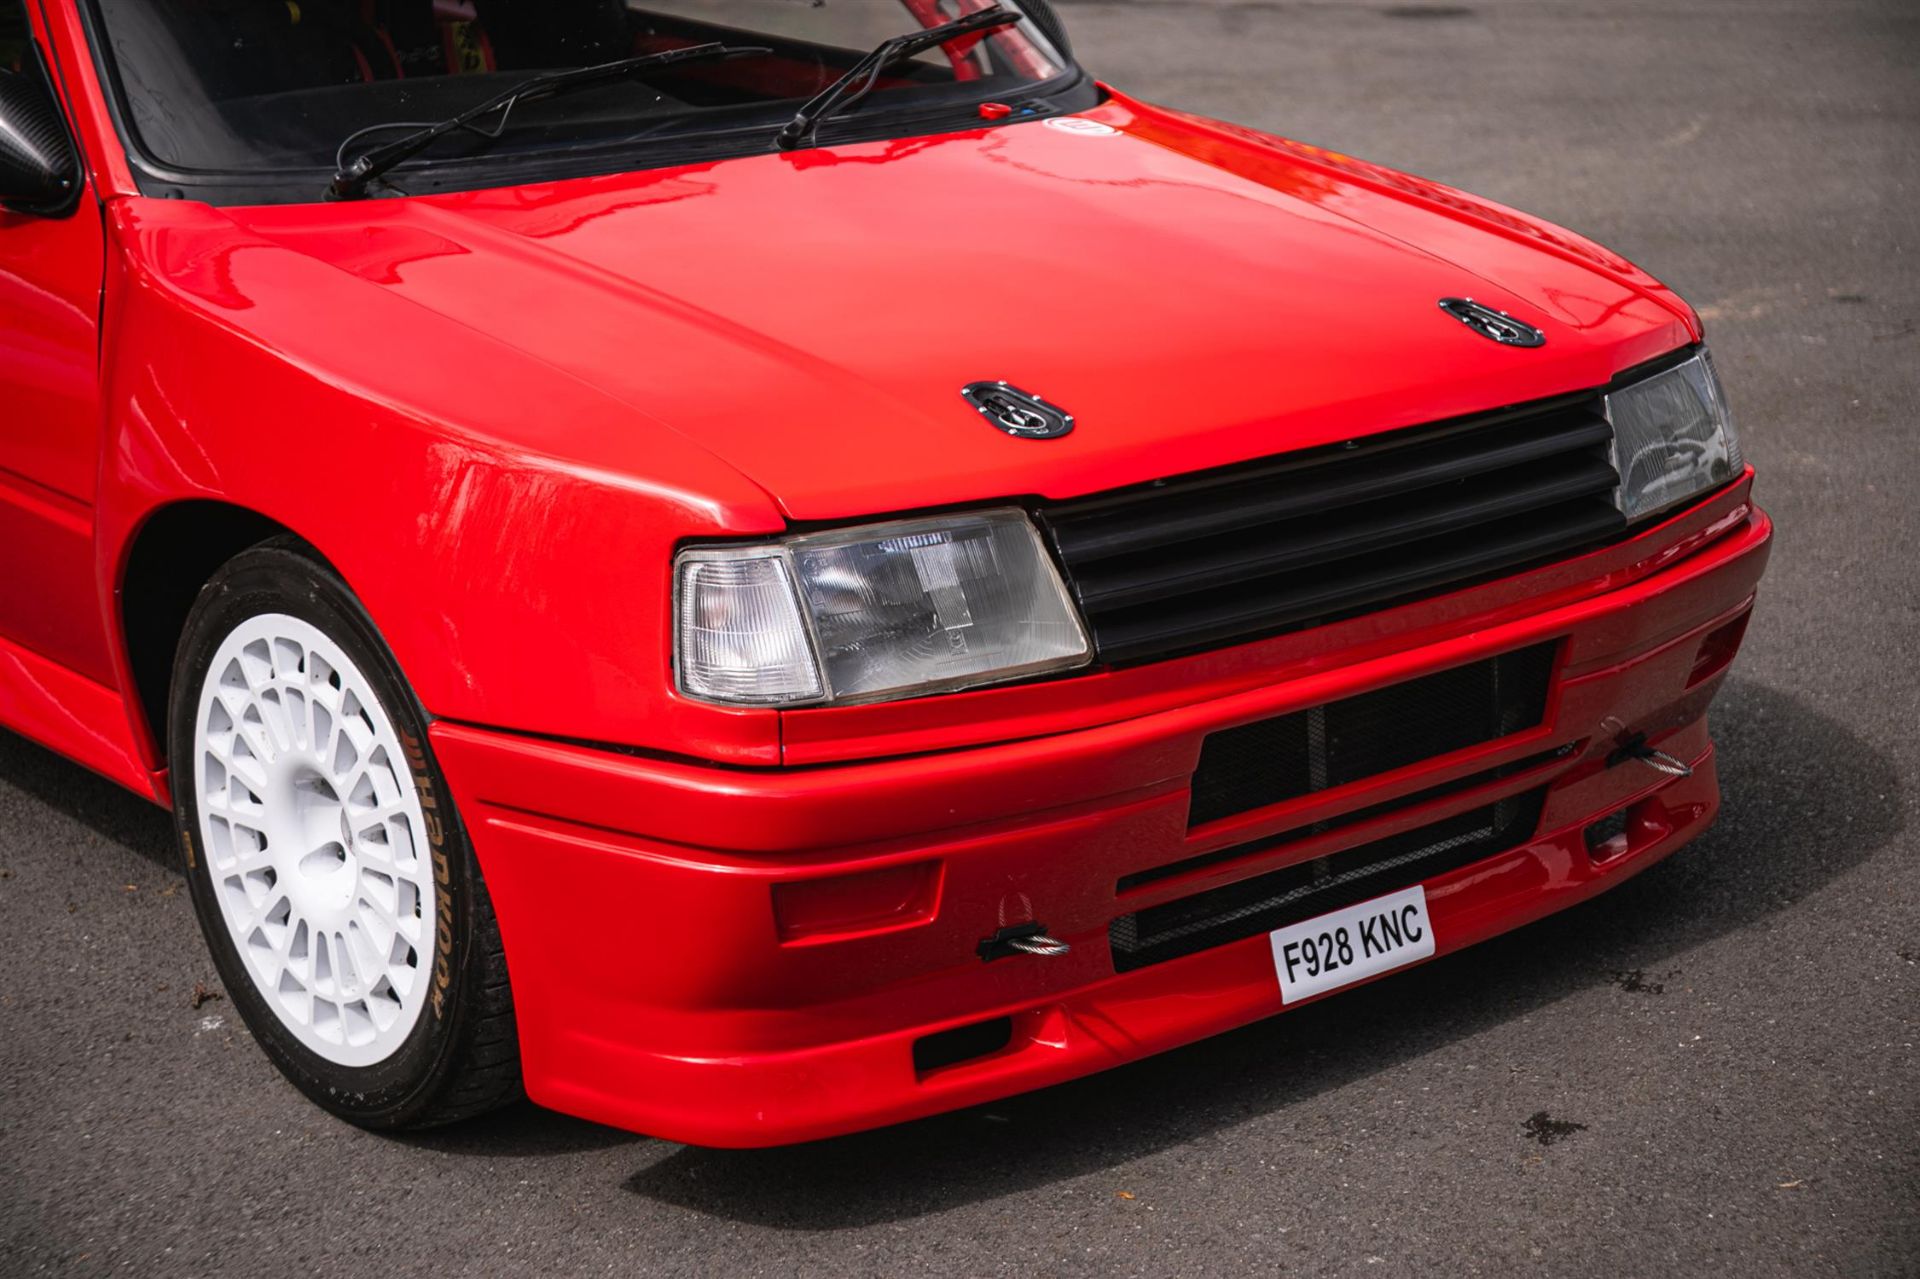 1988 Peugeot 309 GTi 16v Supercharged 'Maxi' Rally Special - Image 8 of 10